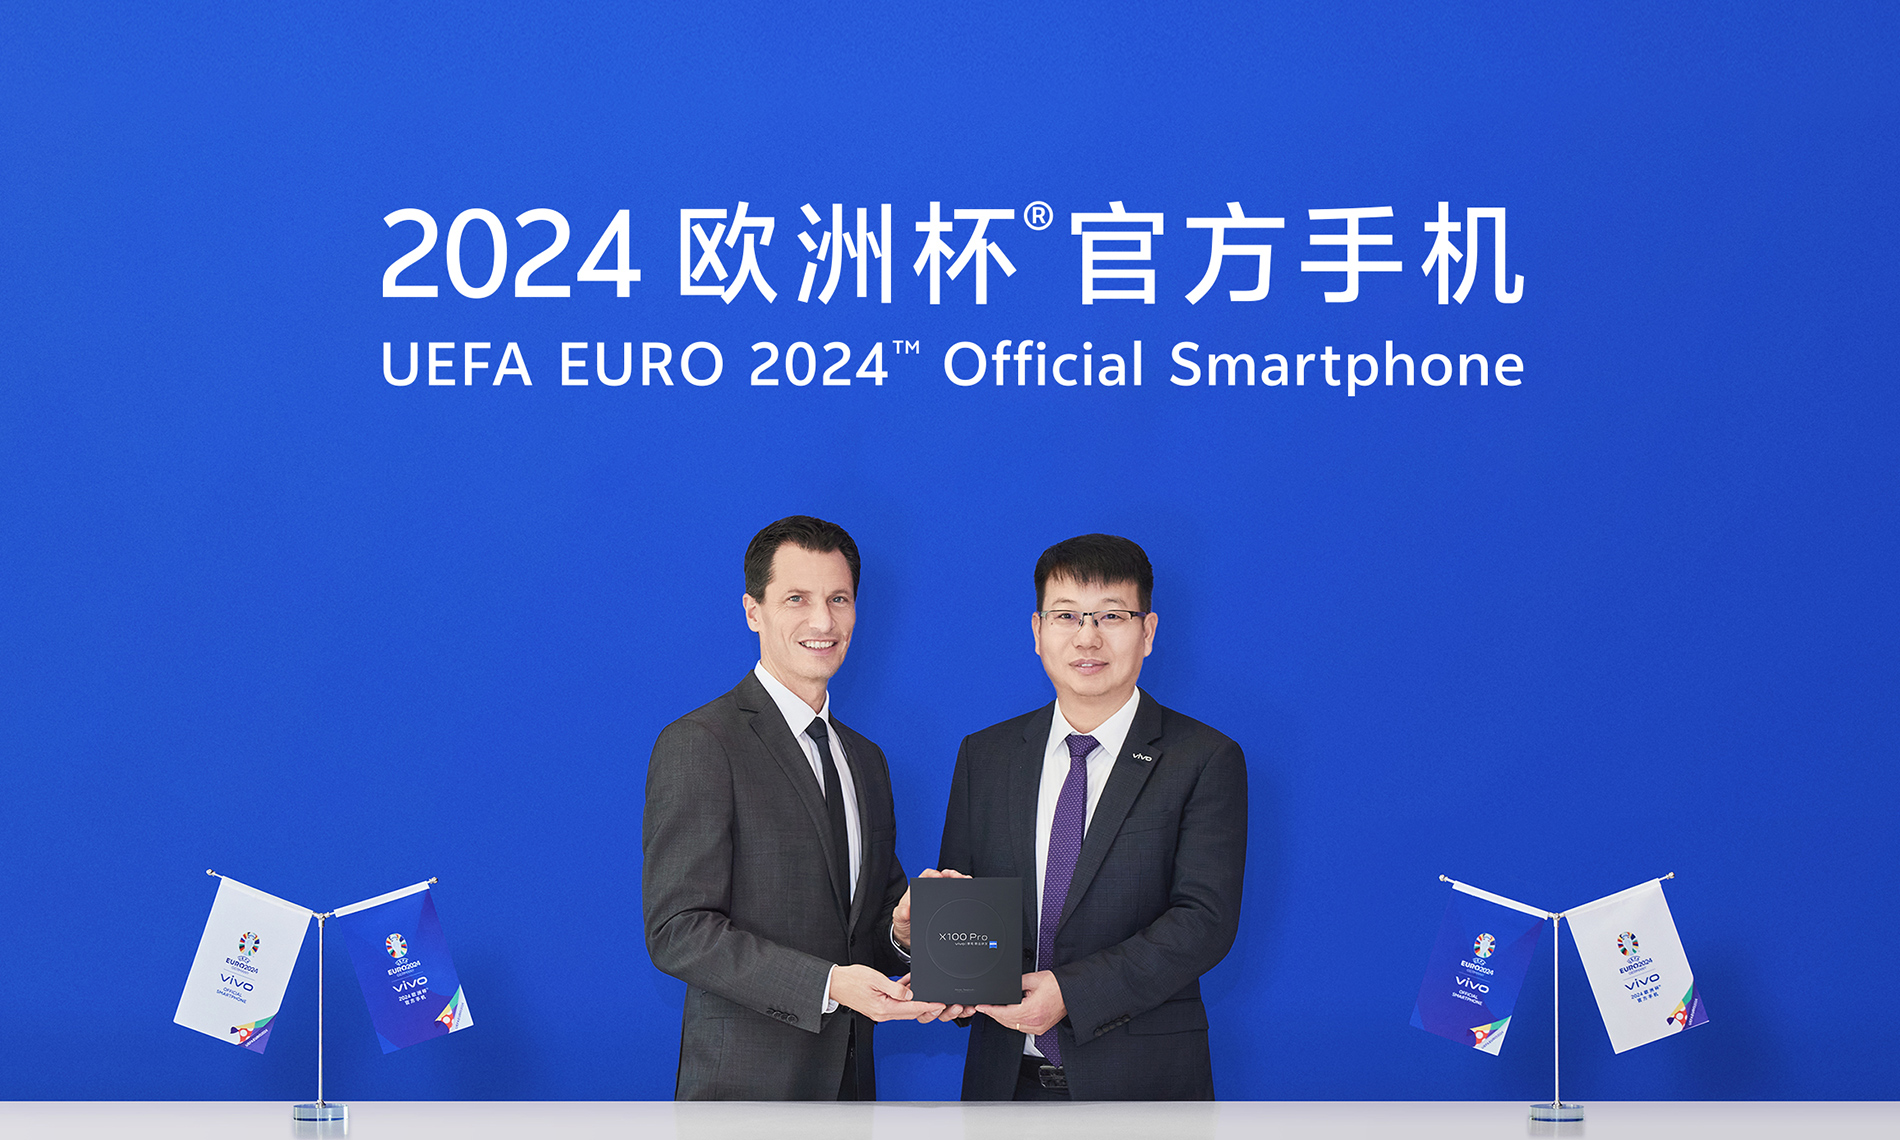 vivo and UEFA Join Hands to Create Unforgettable Moments for Fans at the Upcoming UEFA EURO 2024™